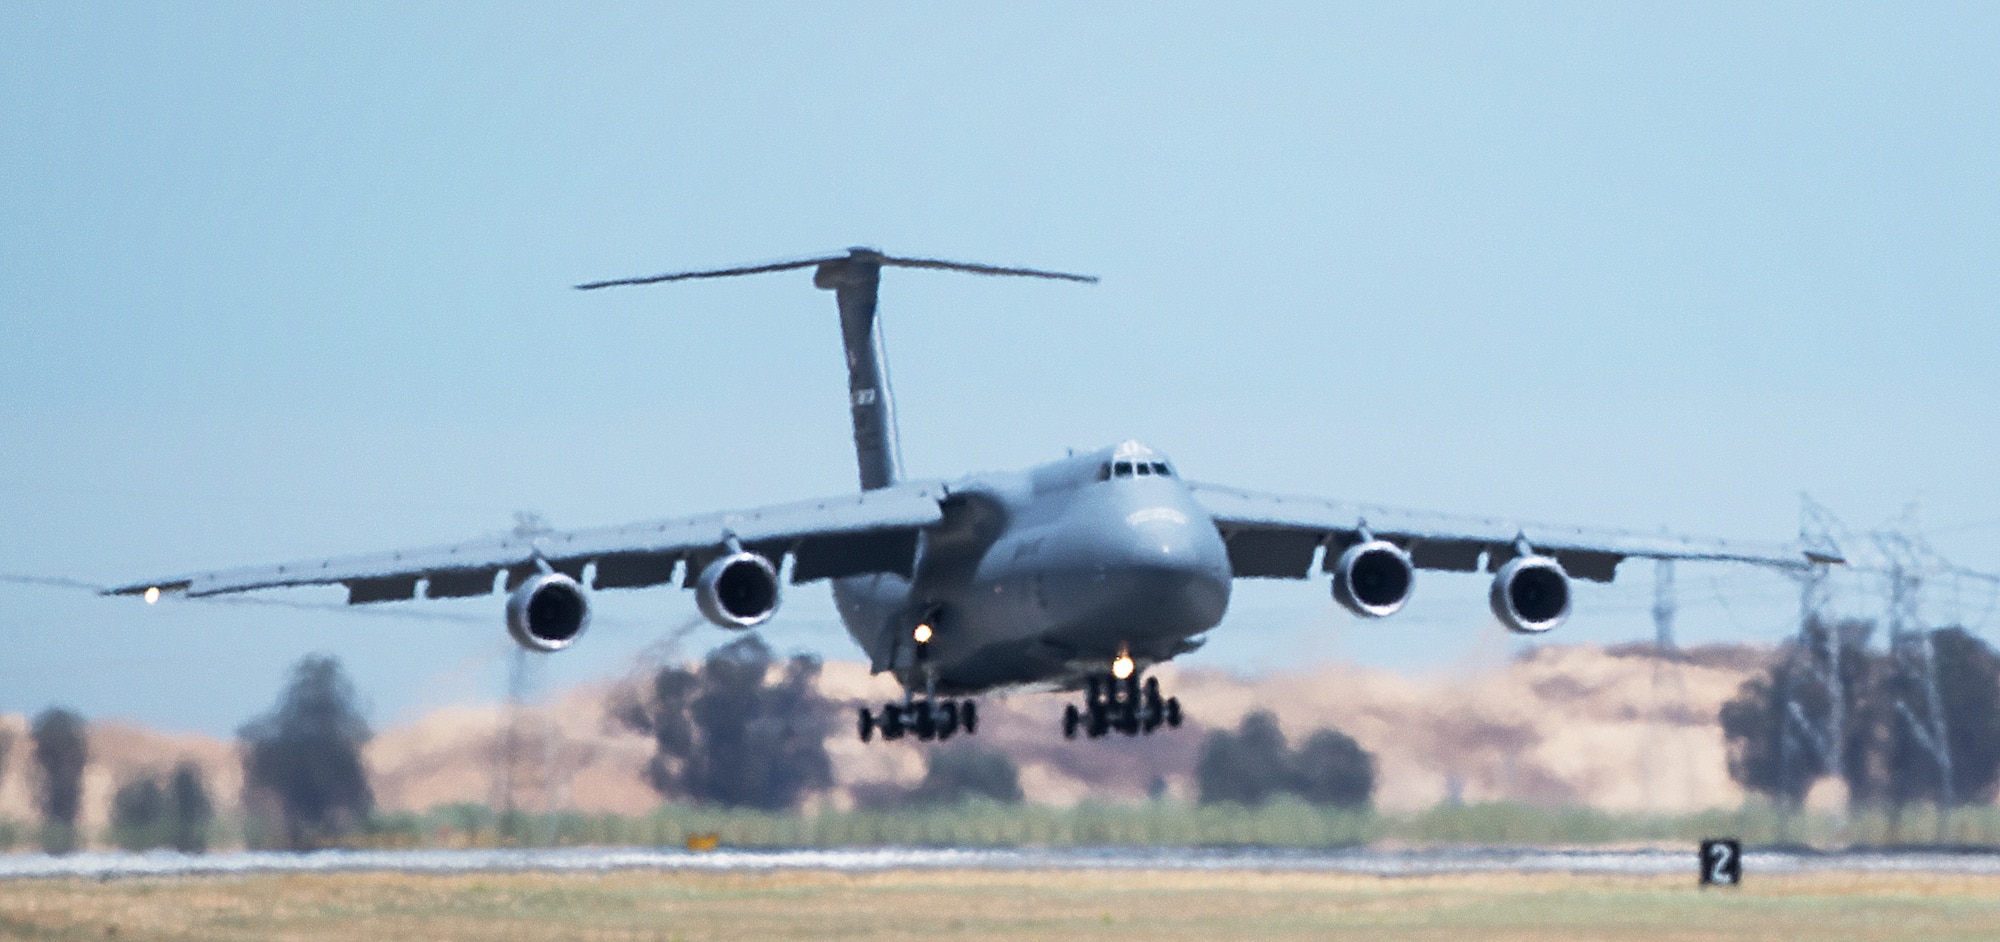 Delivery of a newly refurbished C-5M Super Galaxy arrives at Travis Air Force Base, California, July 8, 2015. The newly-modernized aircraft is the seventh C-5M to return to Travis following retrograde and refurbishment. The C-5M Super Galaxy incorporates more than 70 aircraft improvements, including new GE CF6-80C2 engines that support a 22 percent increase in thrust, 55 percent greater climb rate, tenfold increase in engine reliability and Stage 4 noise and emission compliance. (U.S. Air Force photo by Ken Wright)